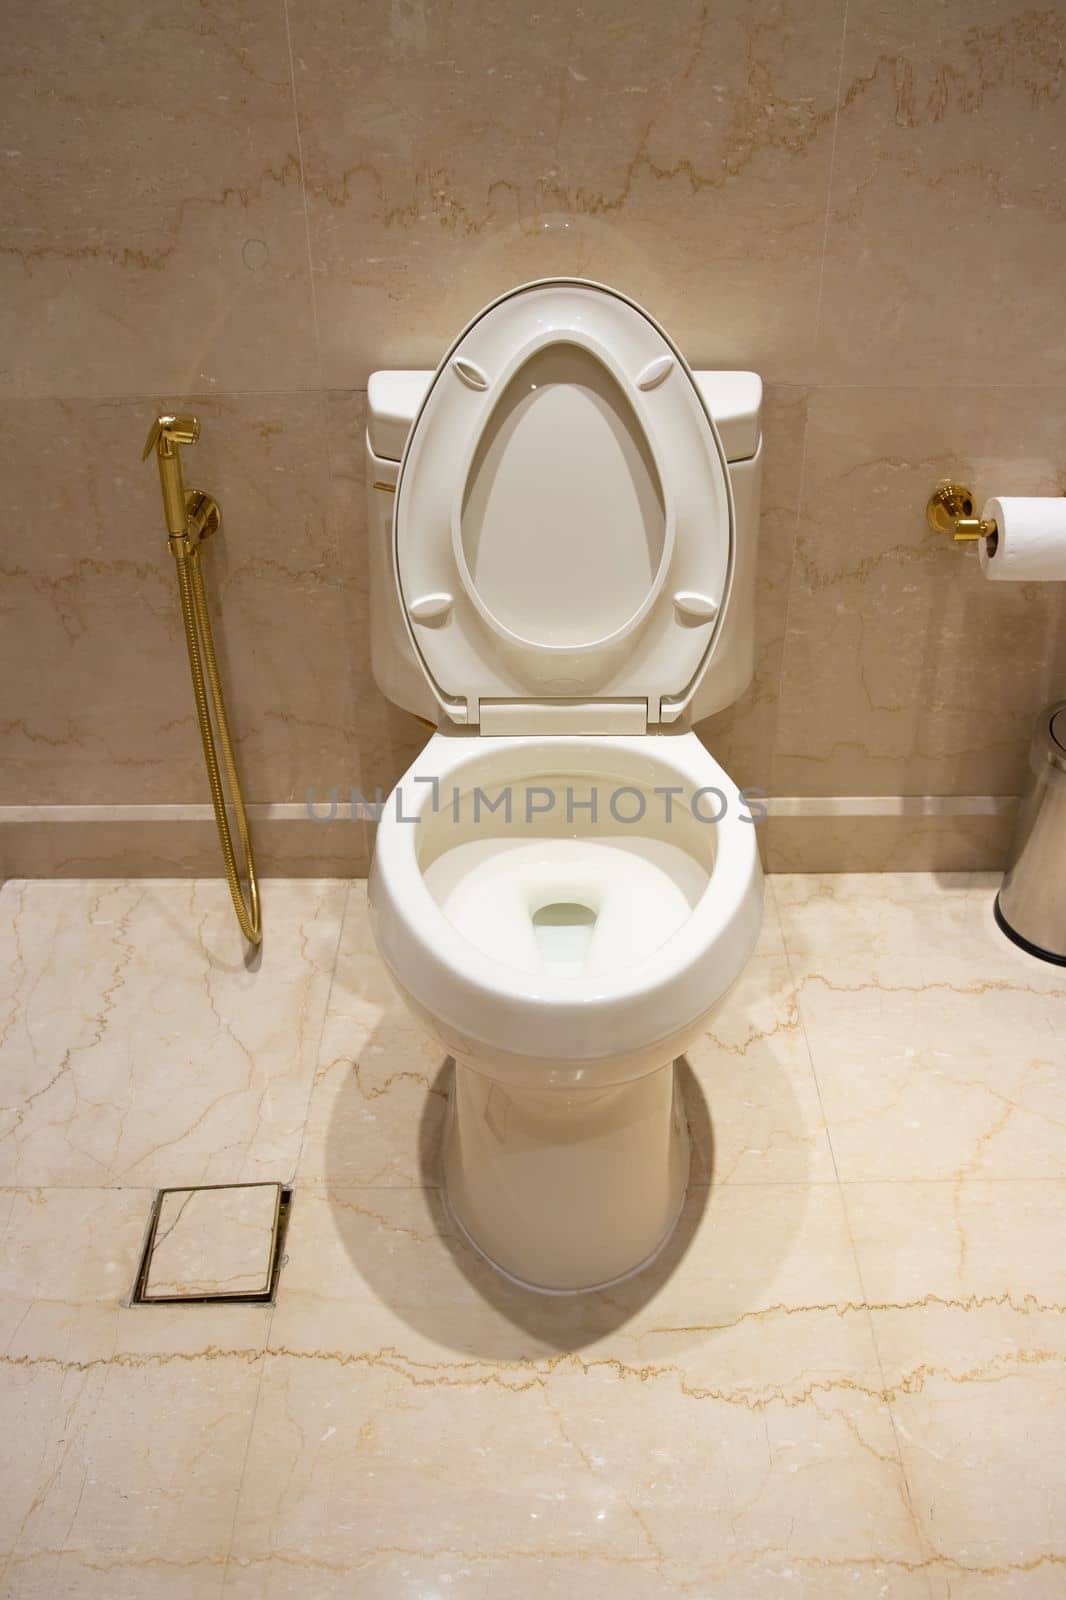 White toilet in the bathroom of an expensive house. by DovidPro